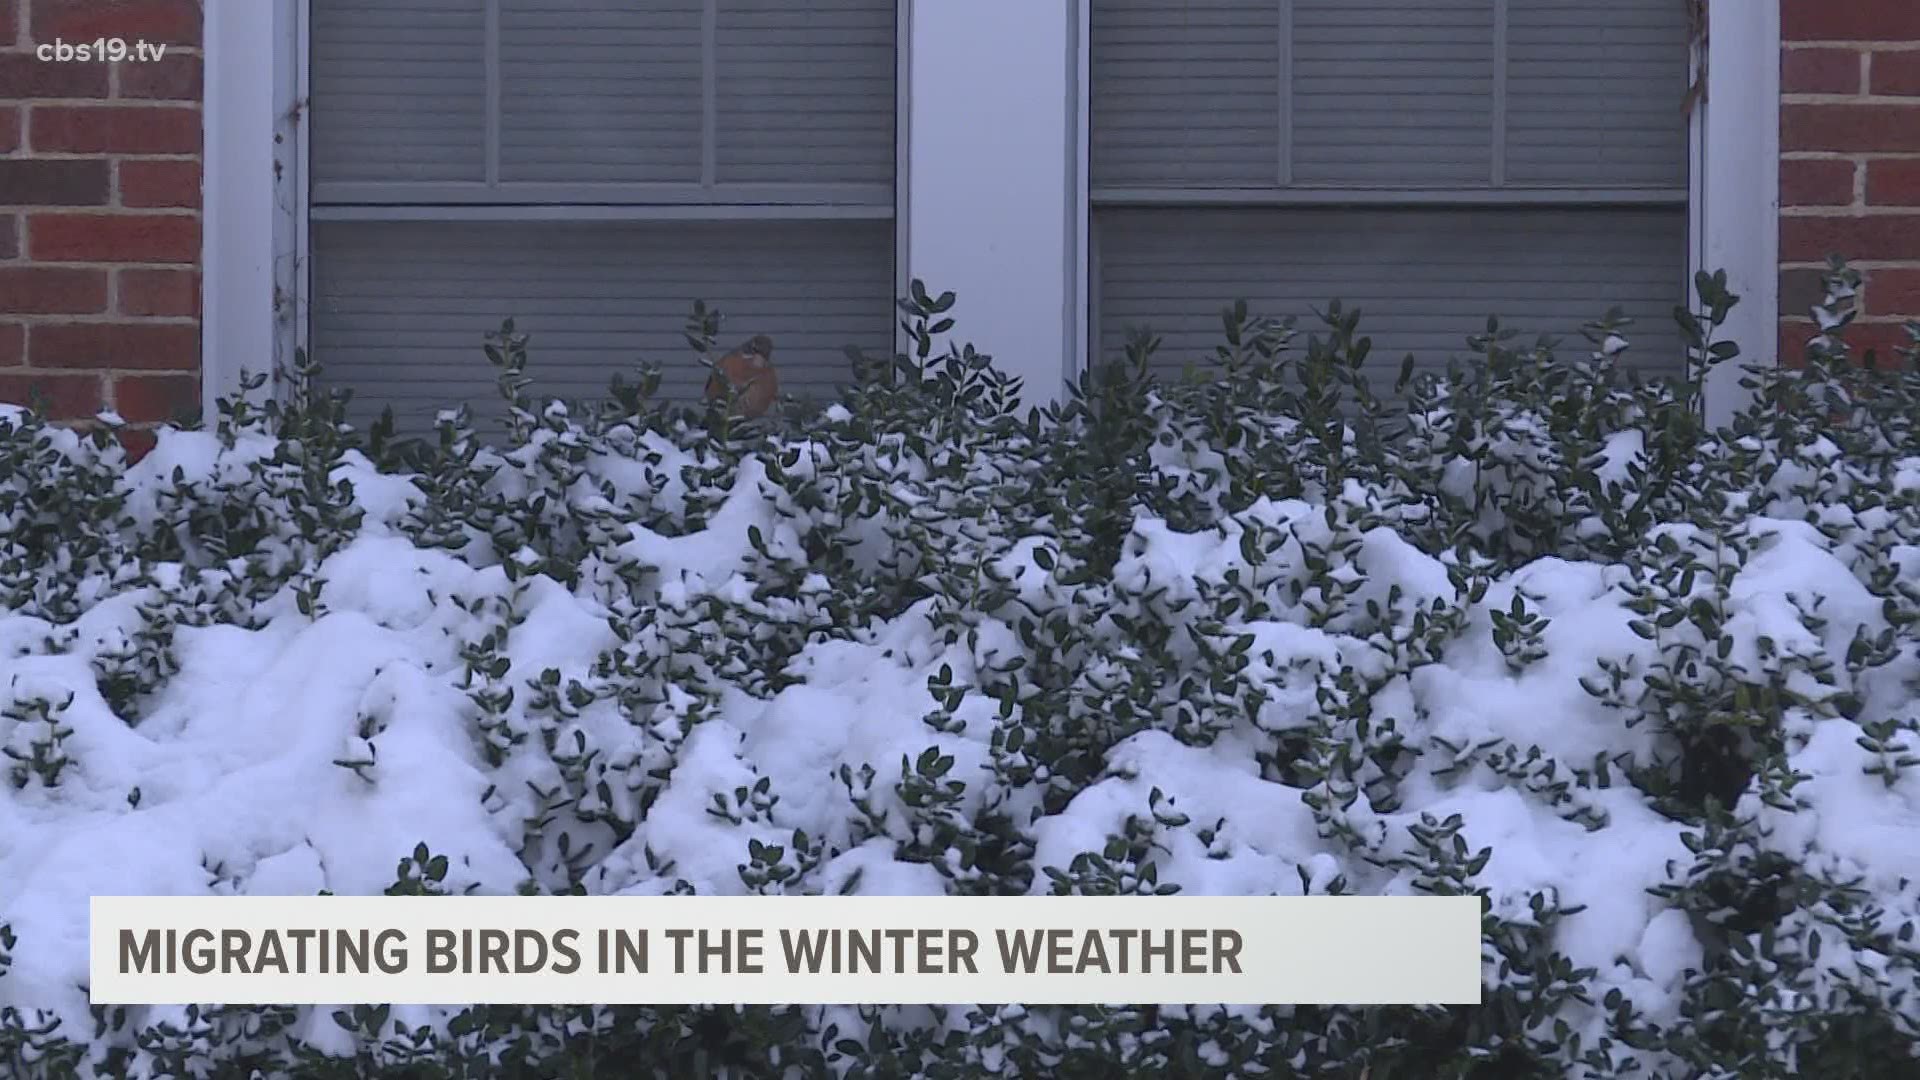 The Texas Parks and Wildlife Department says the migrating birds may be seeking shelter and warmth near your home.